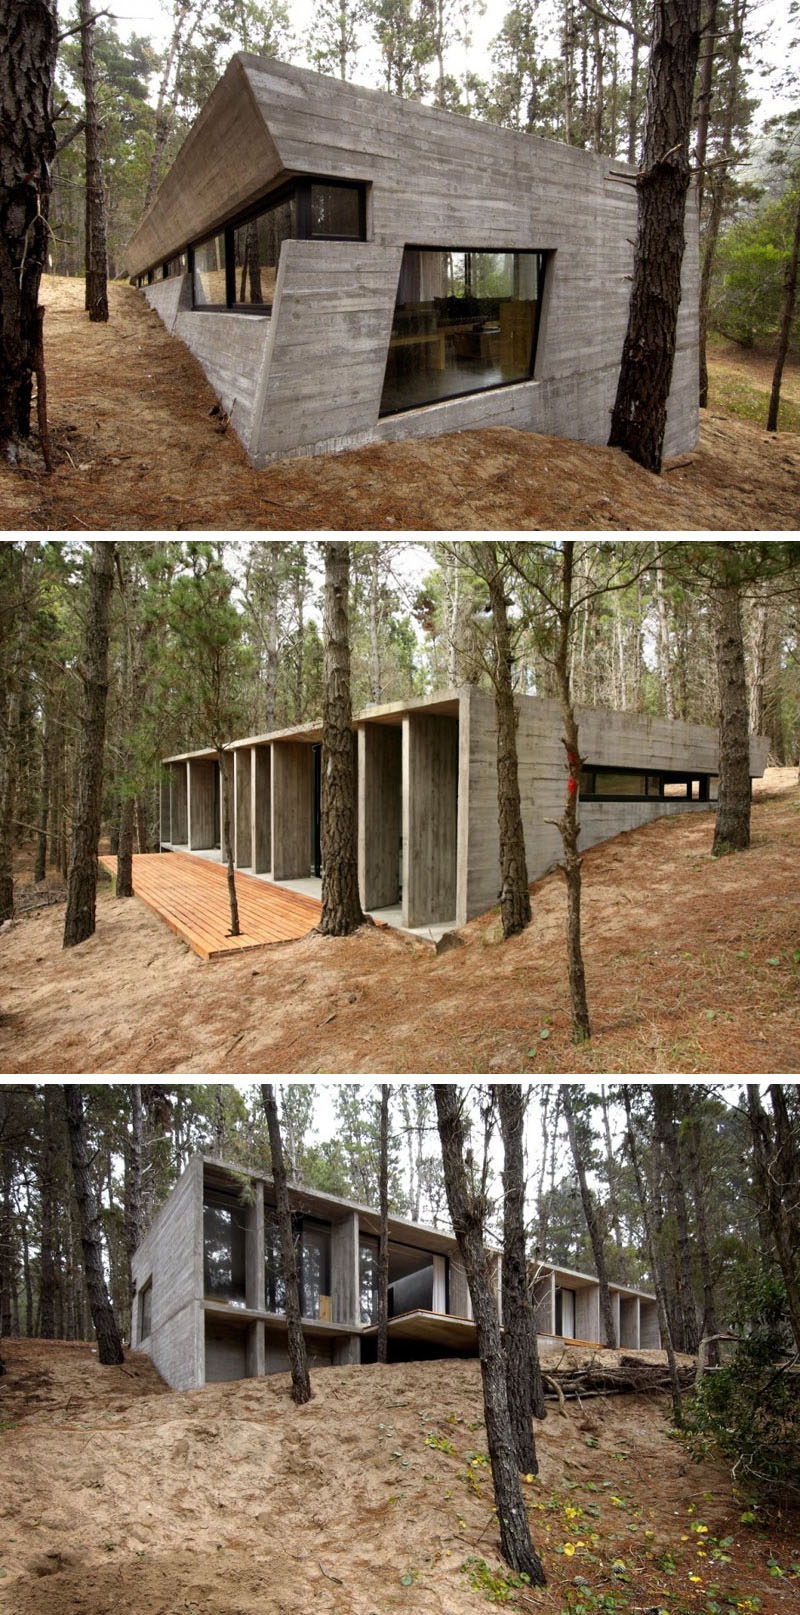 18 Modern House In The Forest // This concrete house contrasts the natural elements of the forest that surround it.